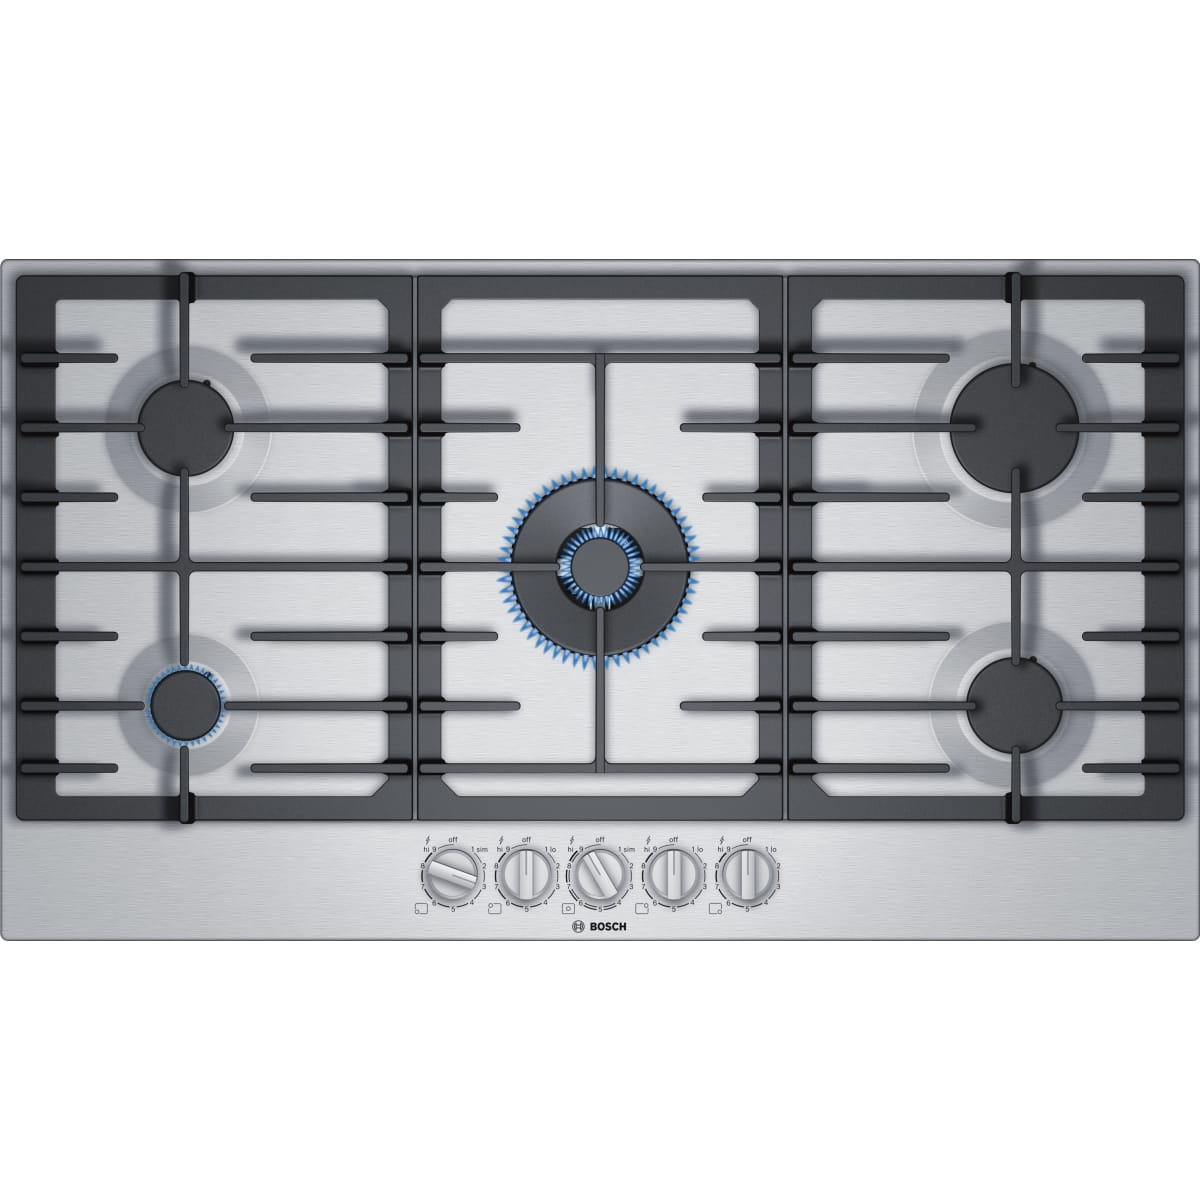 Bosch 800 Series 36 Built-In Gas Cooktop with 5 Burners in